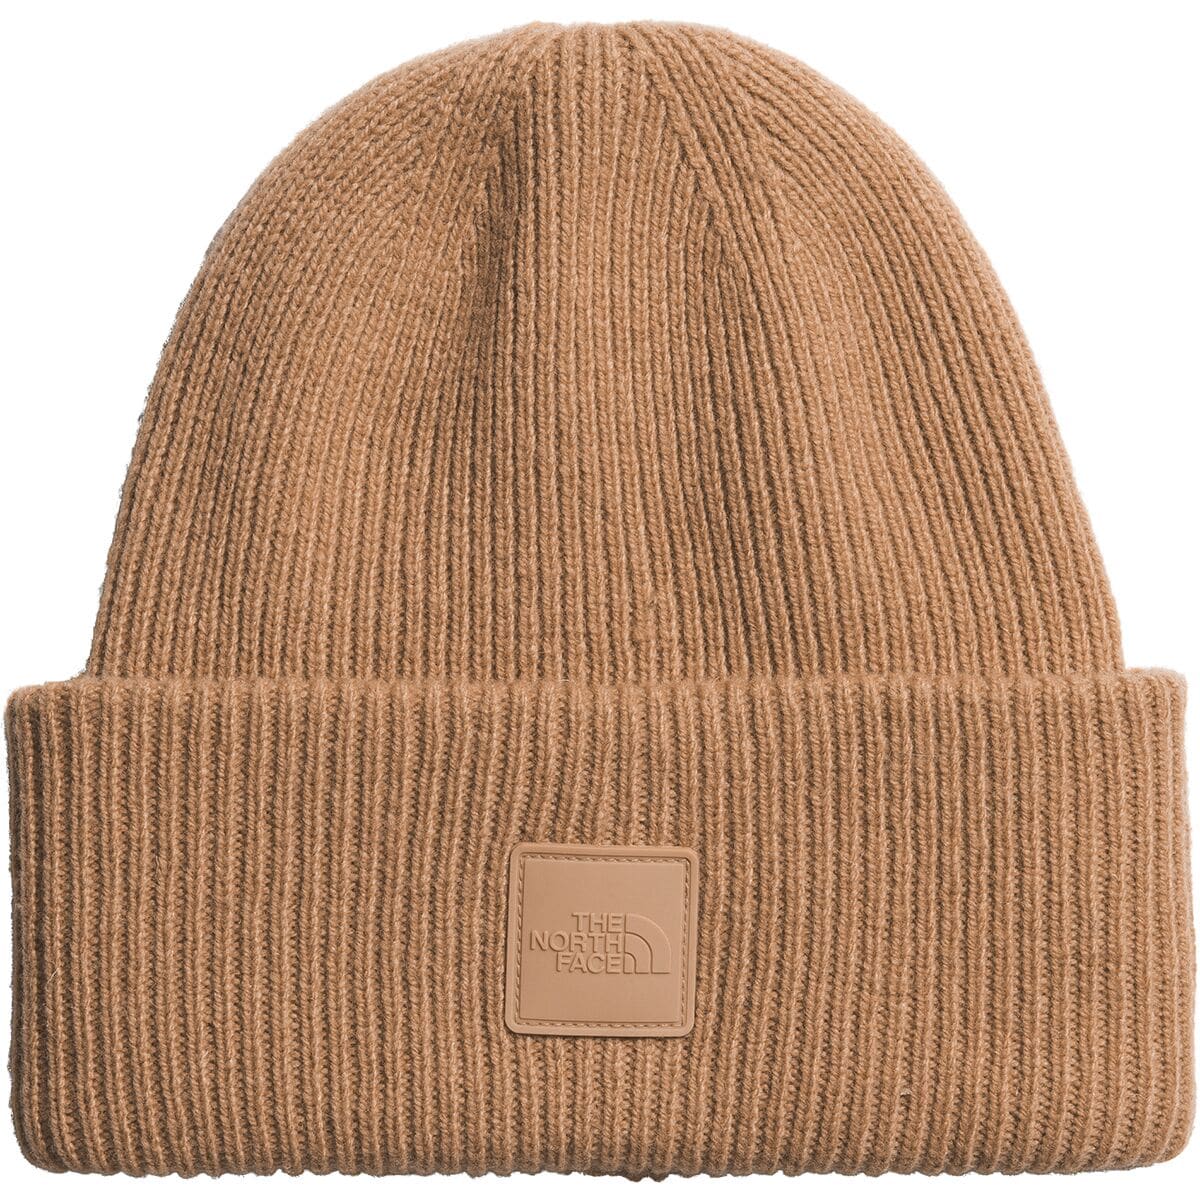 The North Face Urban Patch - Accessories Beanie